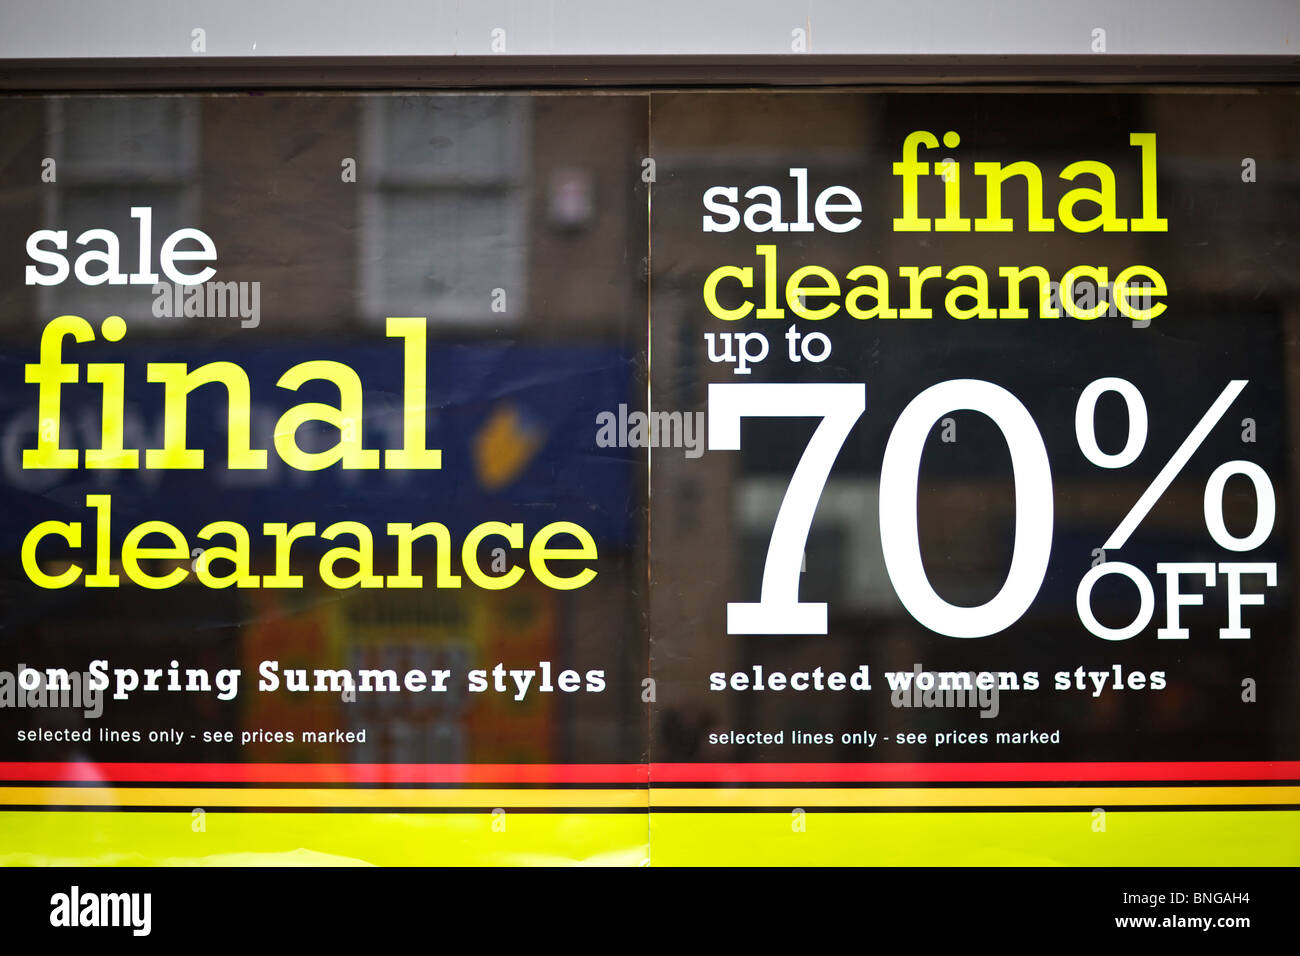 Women's Clearance, Sale Up to 70% Off